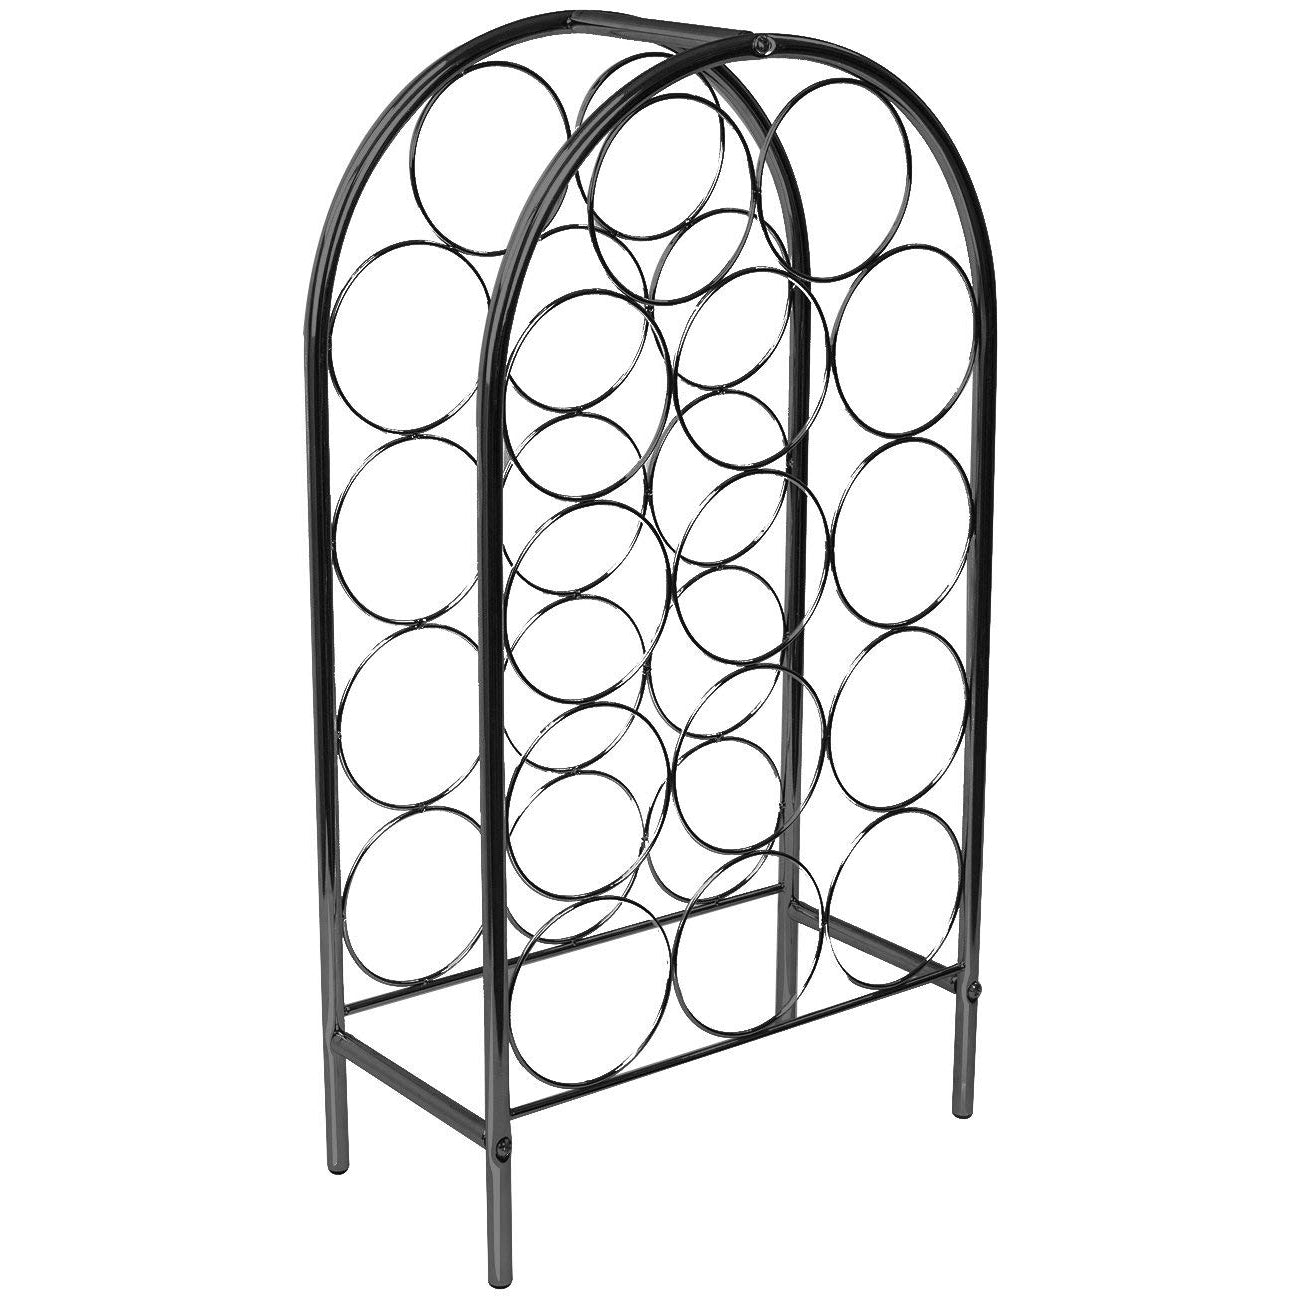 14-Bottle Wine Rack Stand, Bordeaux Chateau Style - Sorbus Home